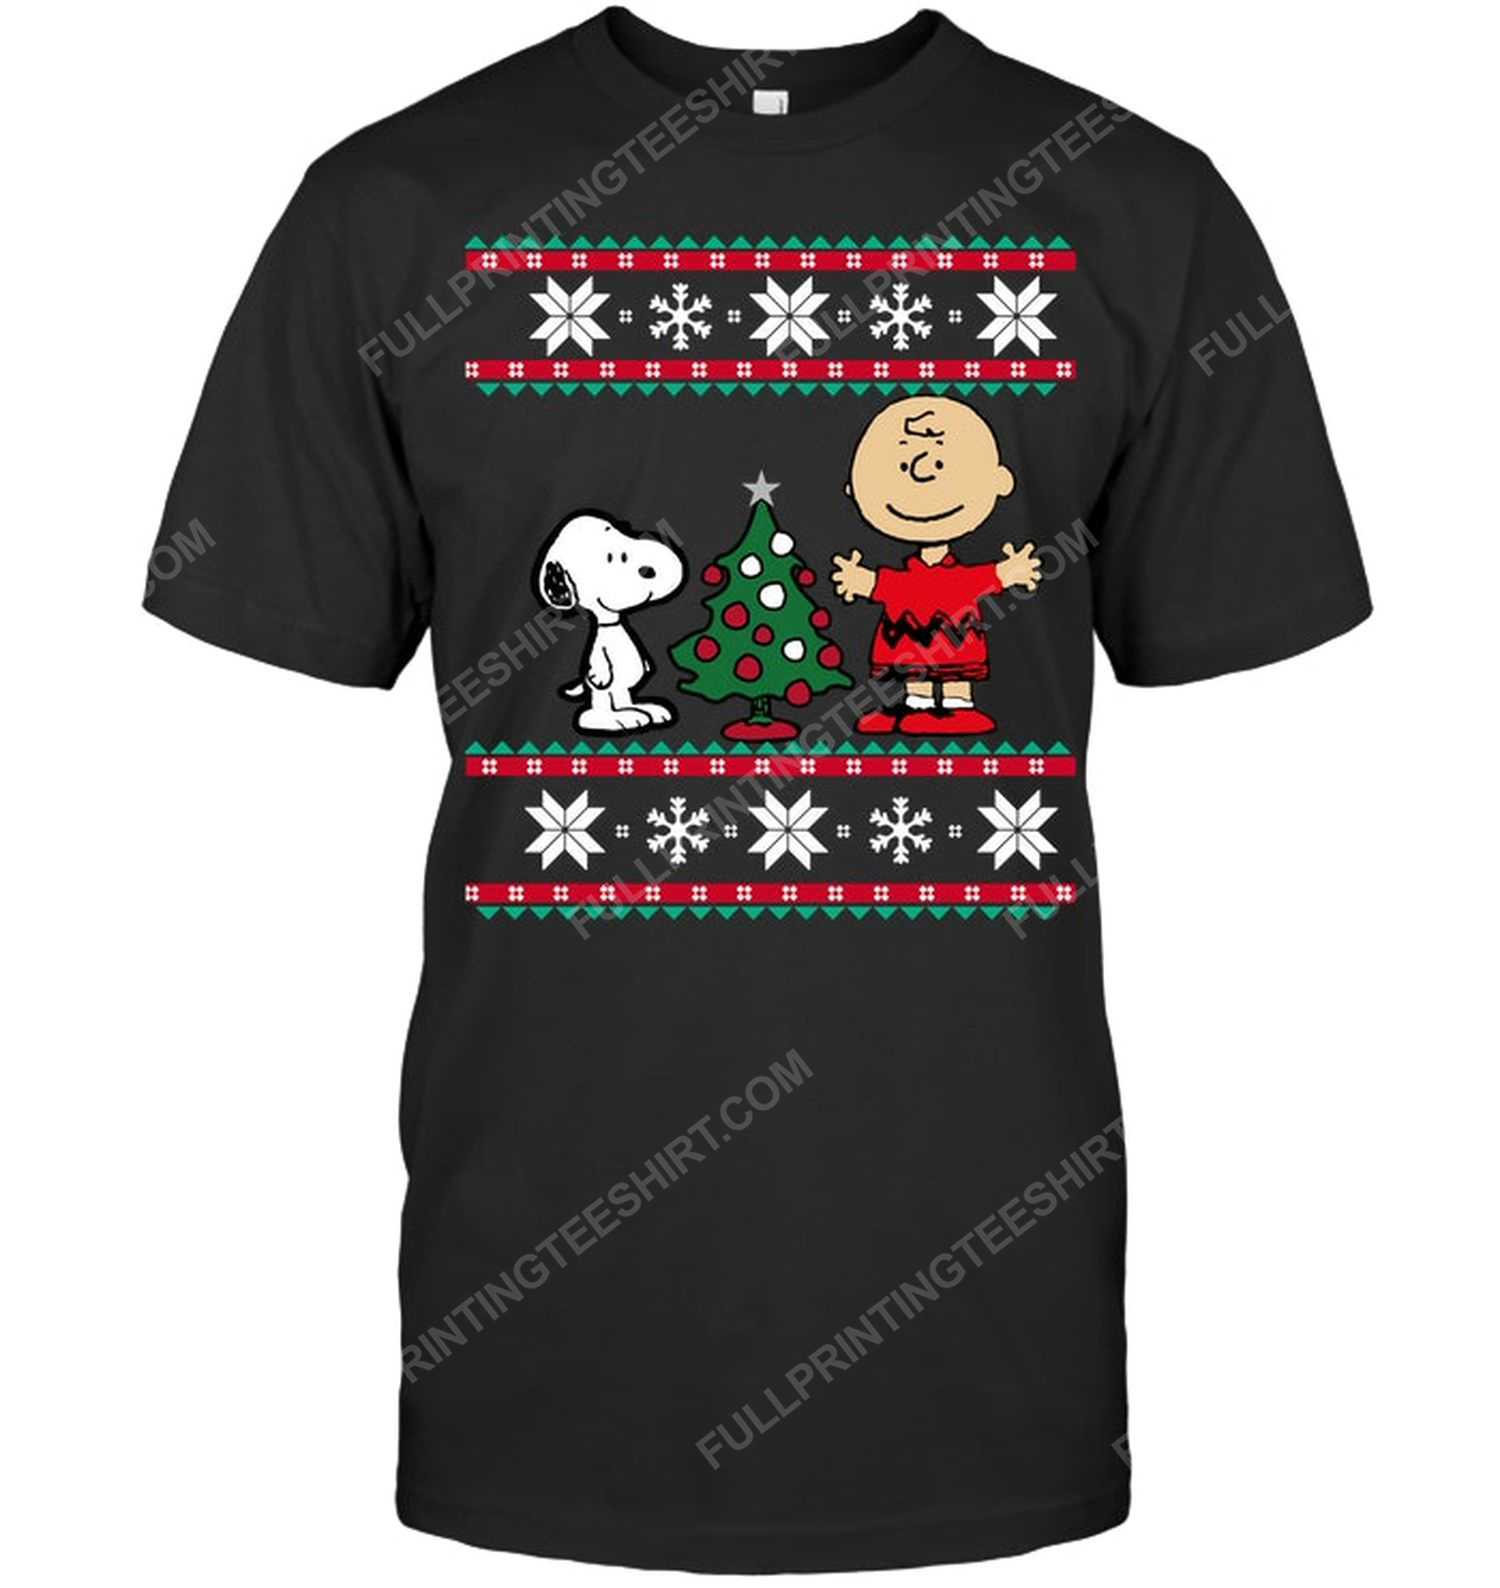 Charlie brown and snoopy with christmas tree tshirt